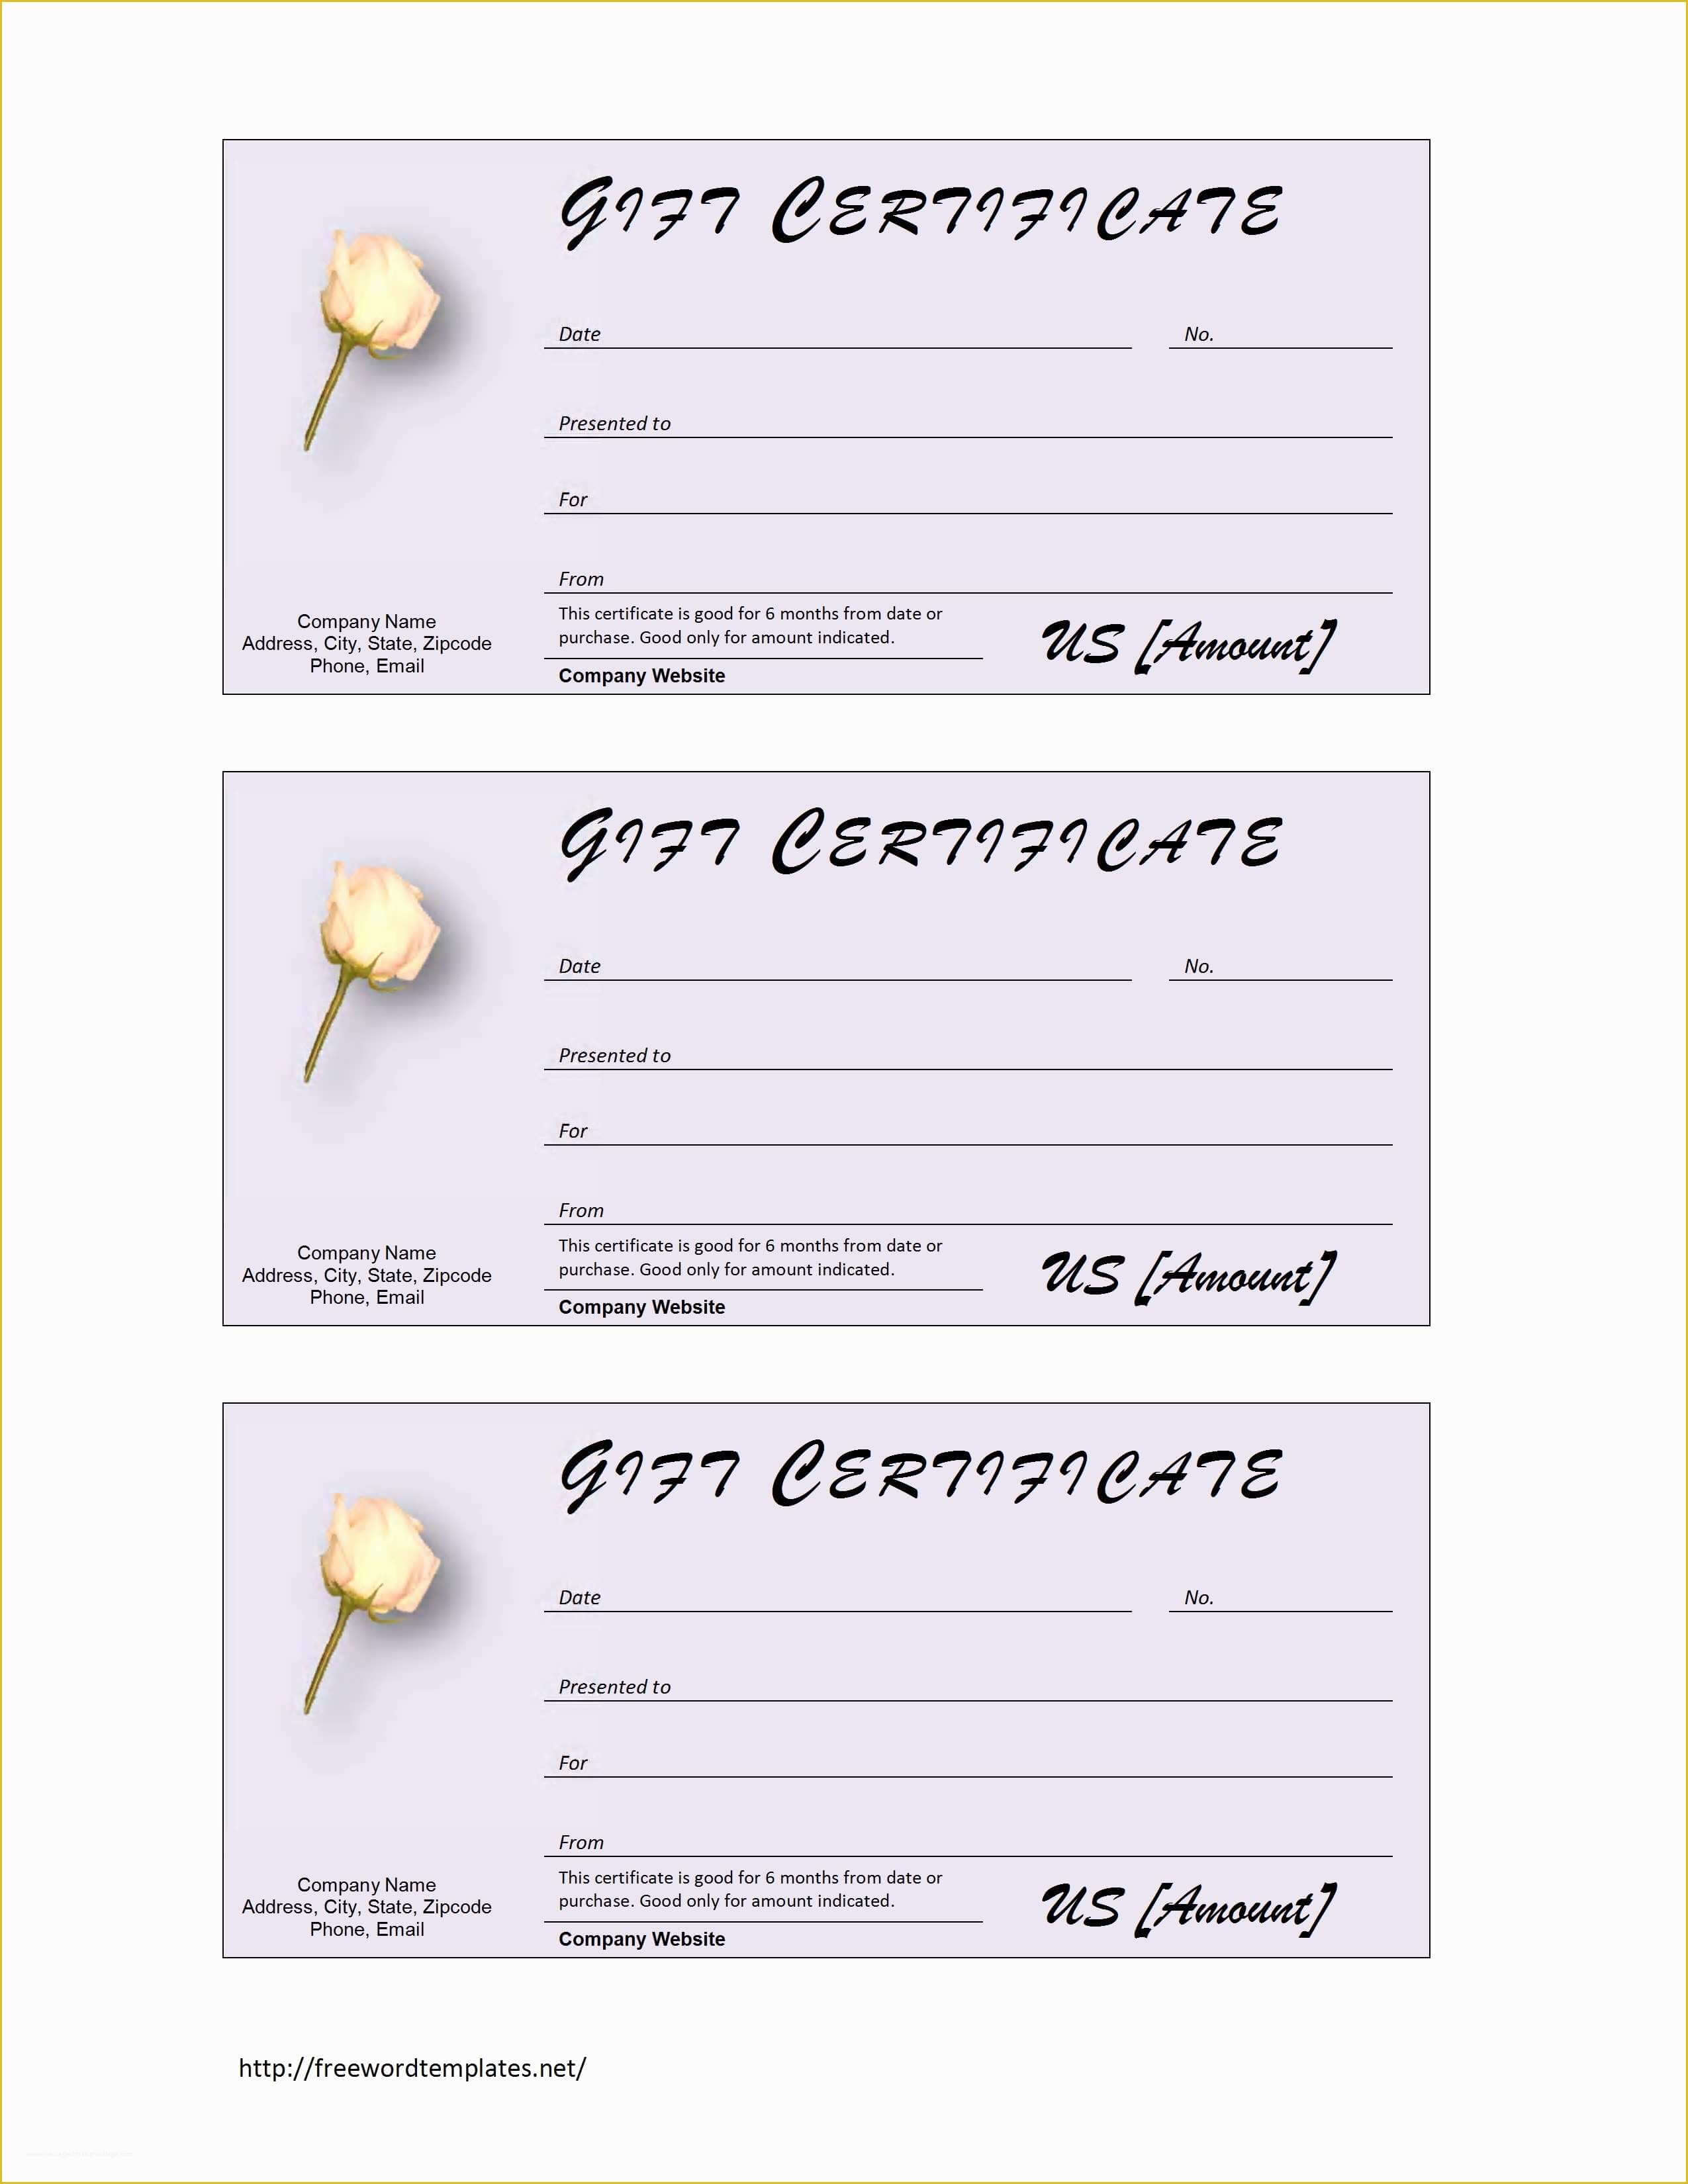 Free Printable Gift Certificates Canada Certificate Template Regarding Company Gift Certificate Template